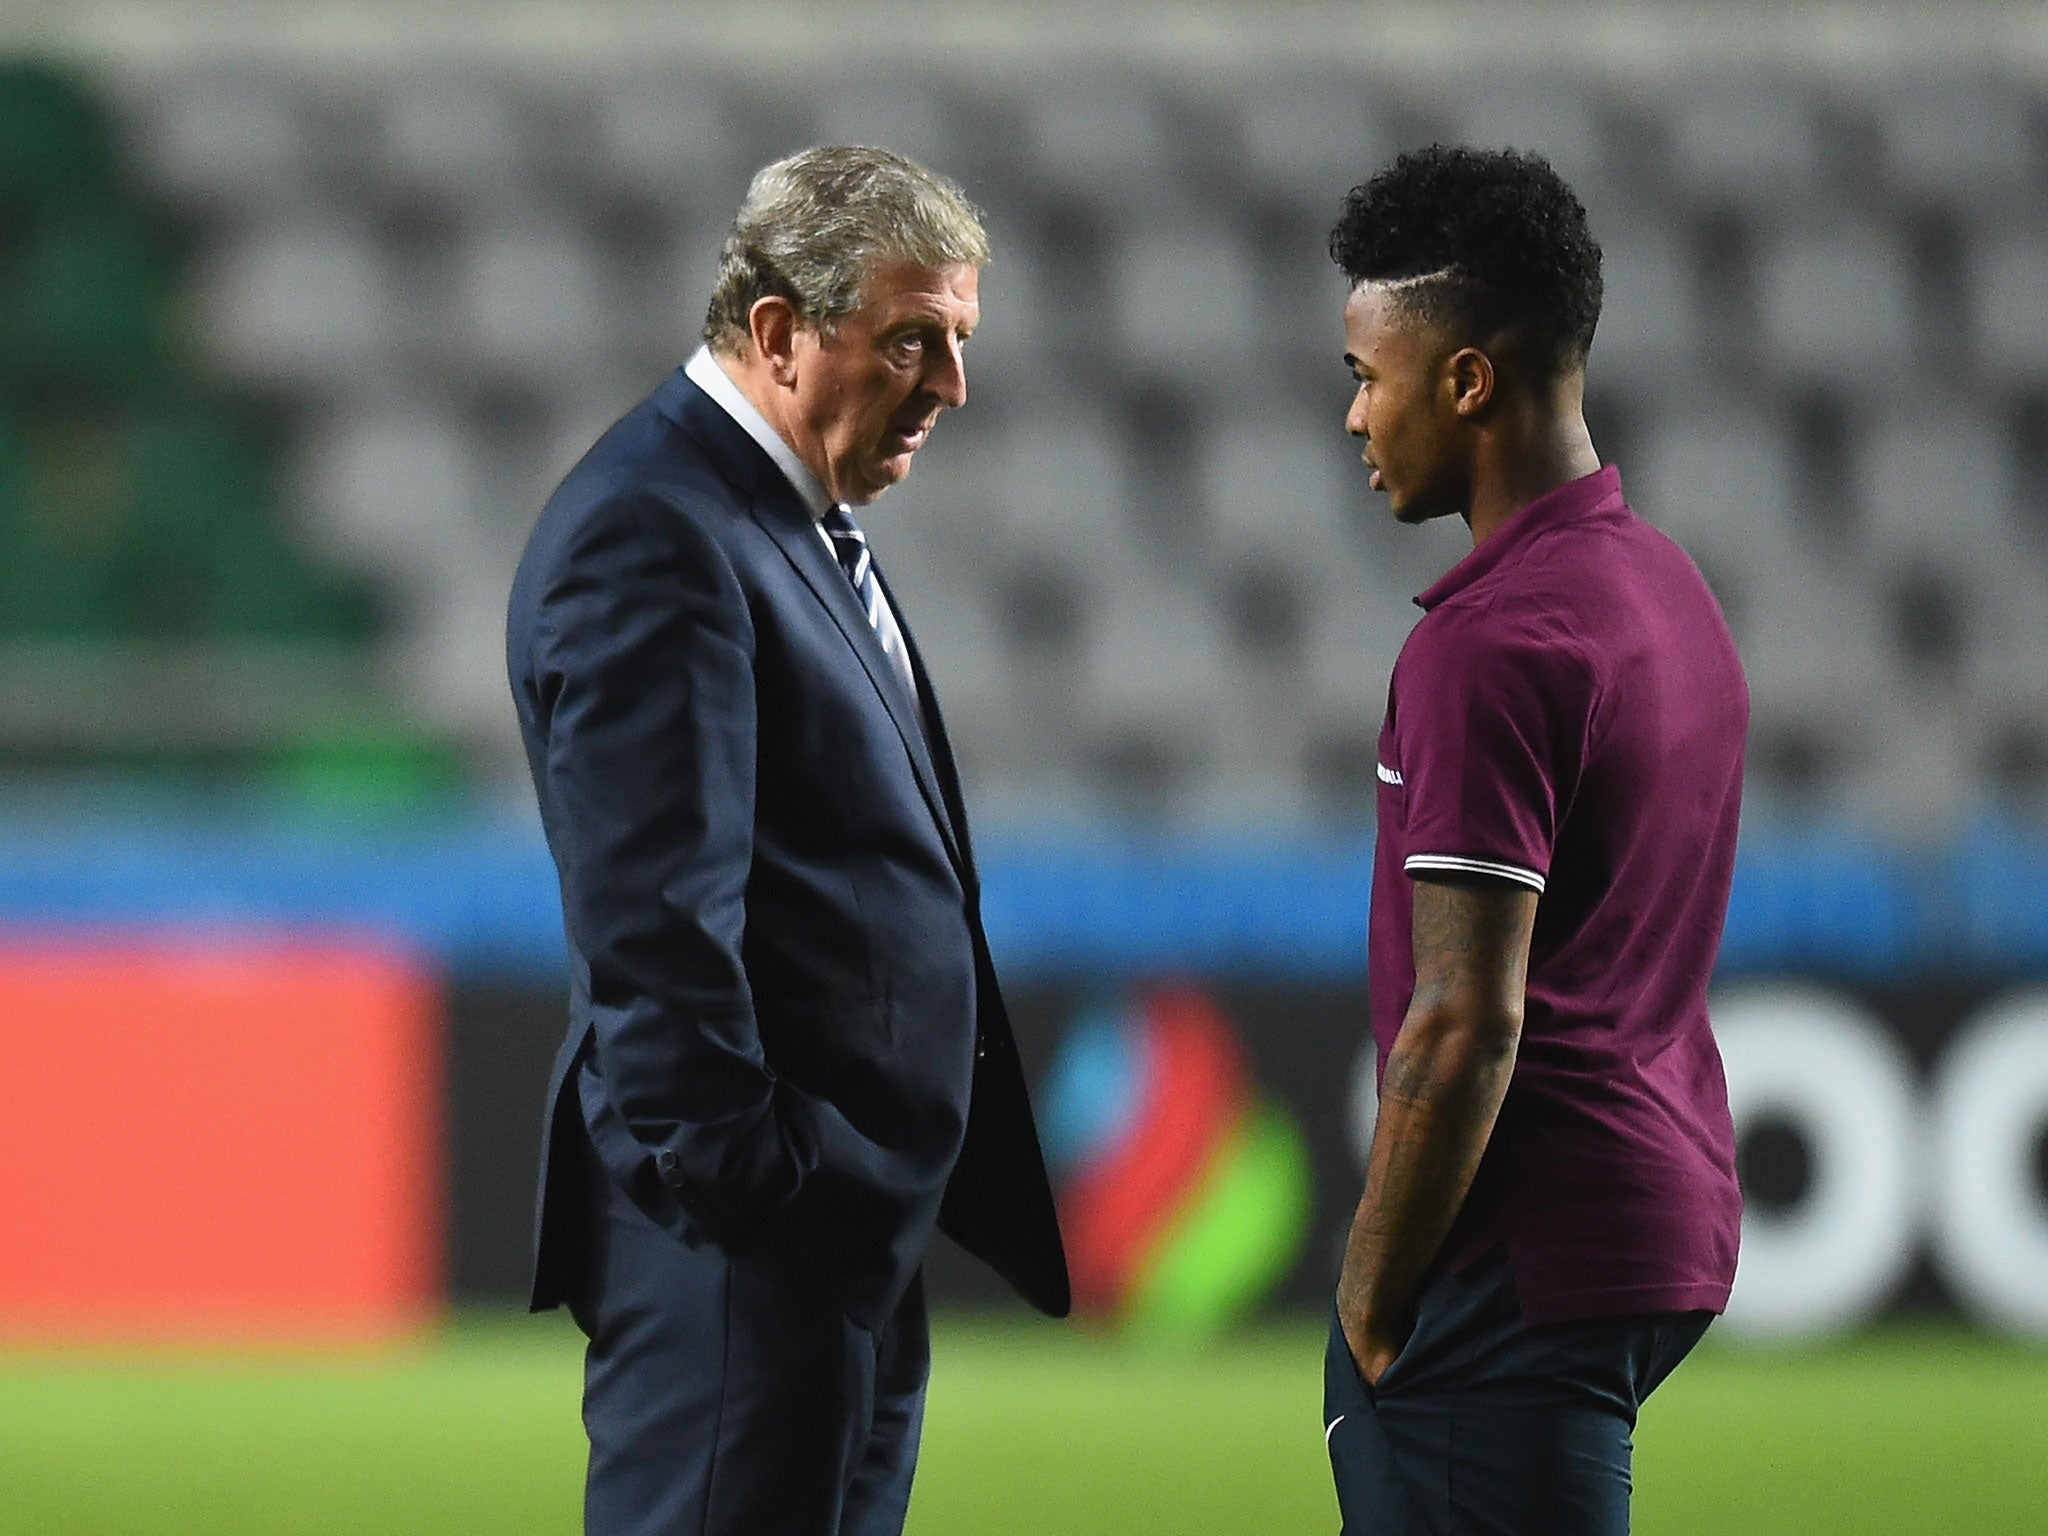 Roy Hodgson speaks to Raheem Sterling at the A. Le Coq stadium in Tallinn